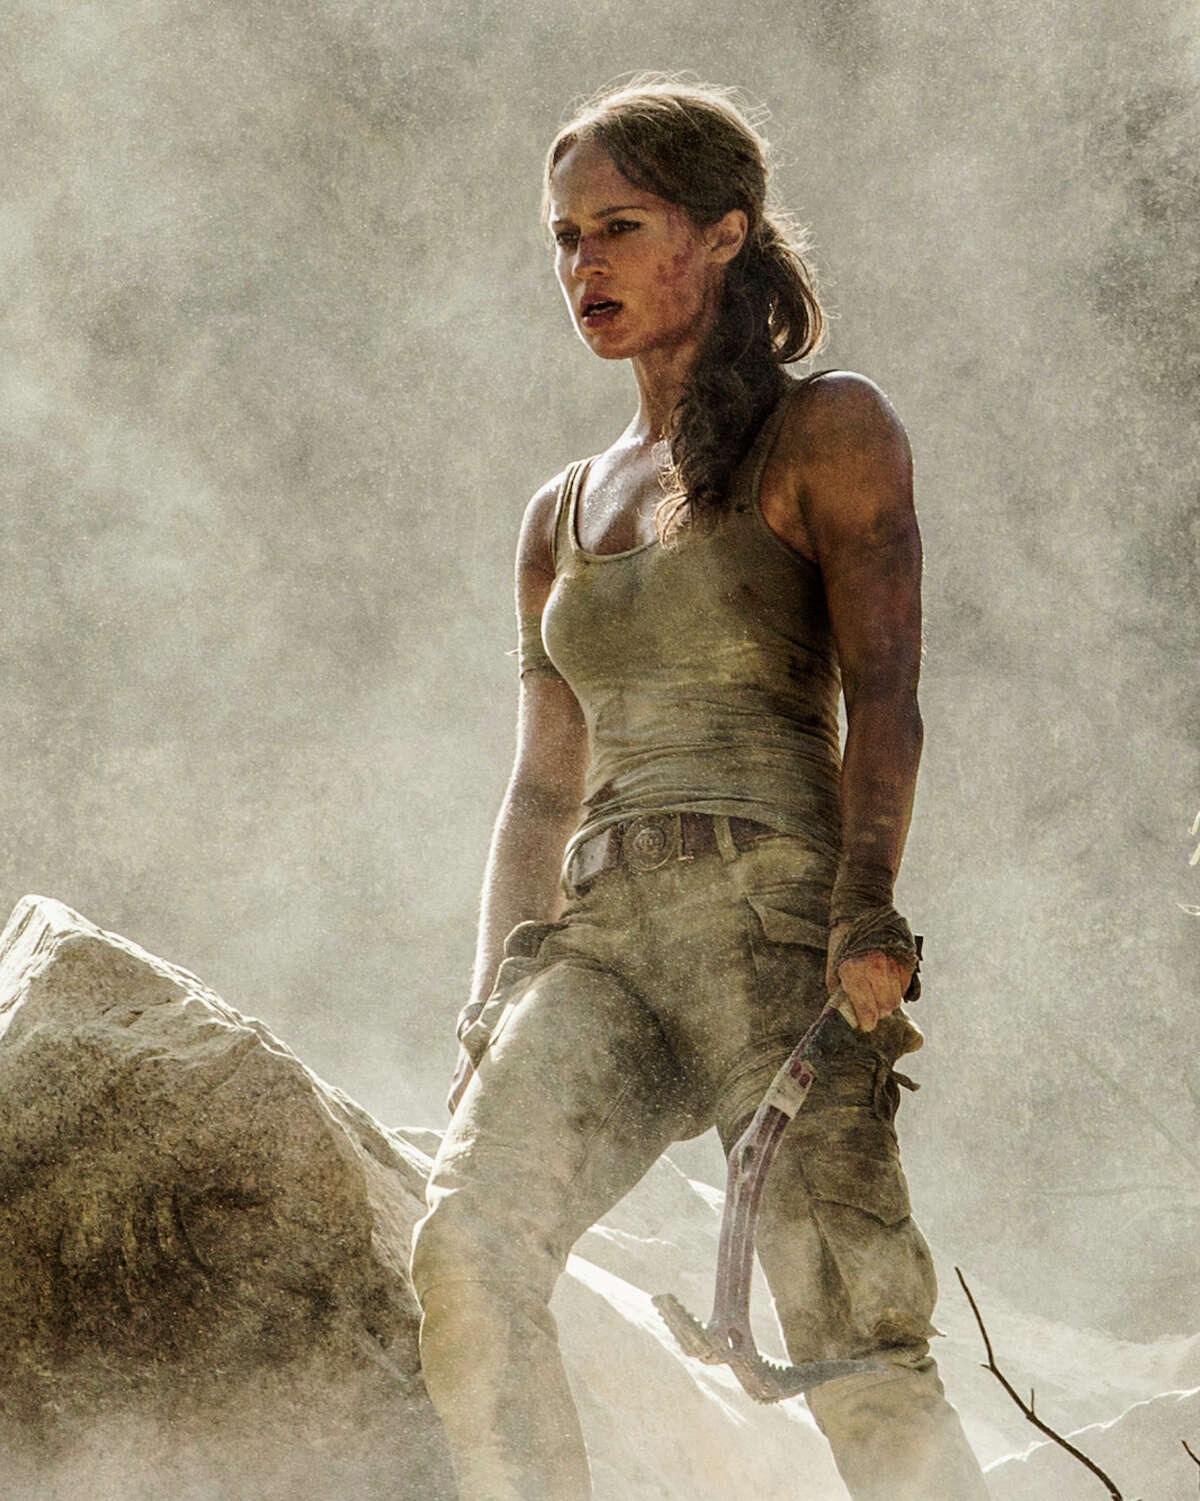 This image released by Warner Bros. Pictures shows Alicia Vikander in a scene from "Tomb Raider." (Ilze Kitshoff/Warner Bros. Pictures via AP)